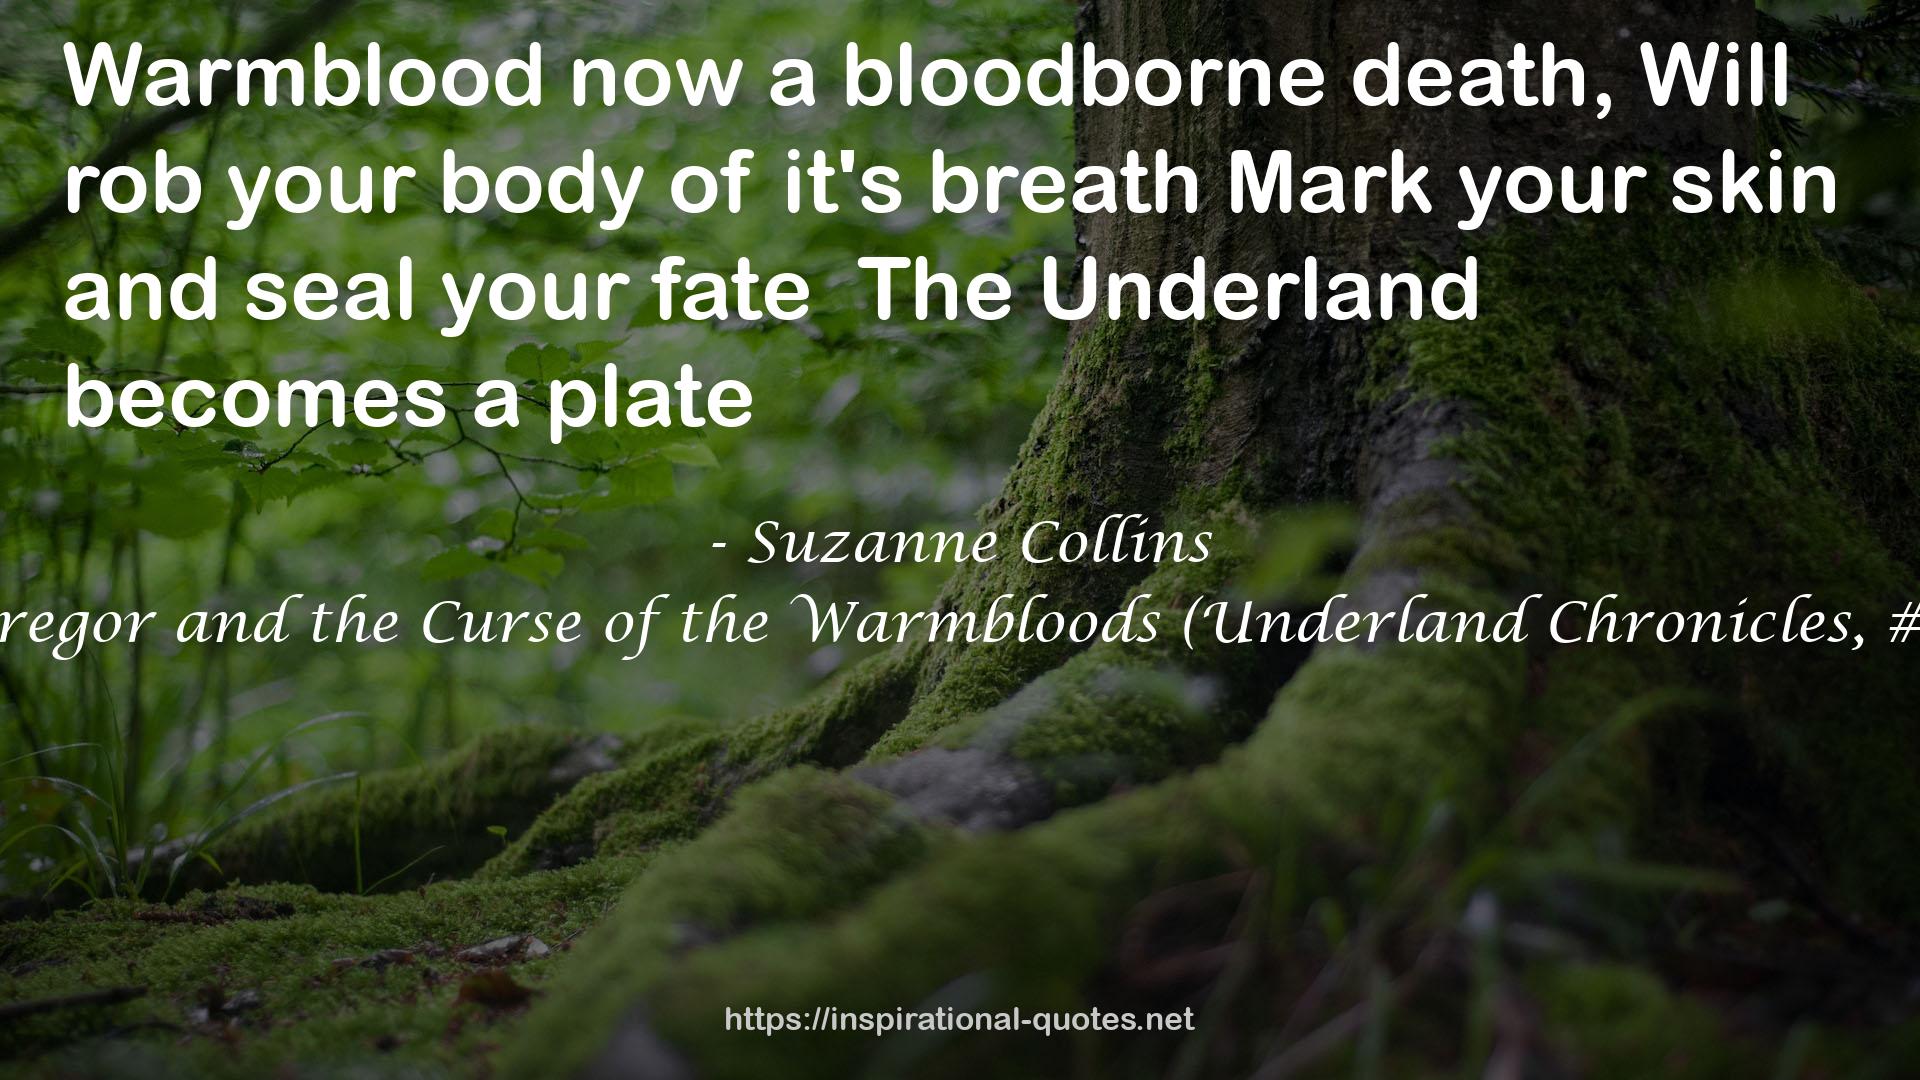 Gregor and the Curse of the Warmbloods (Underland Chronicles, #3) QUOTES